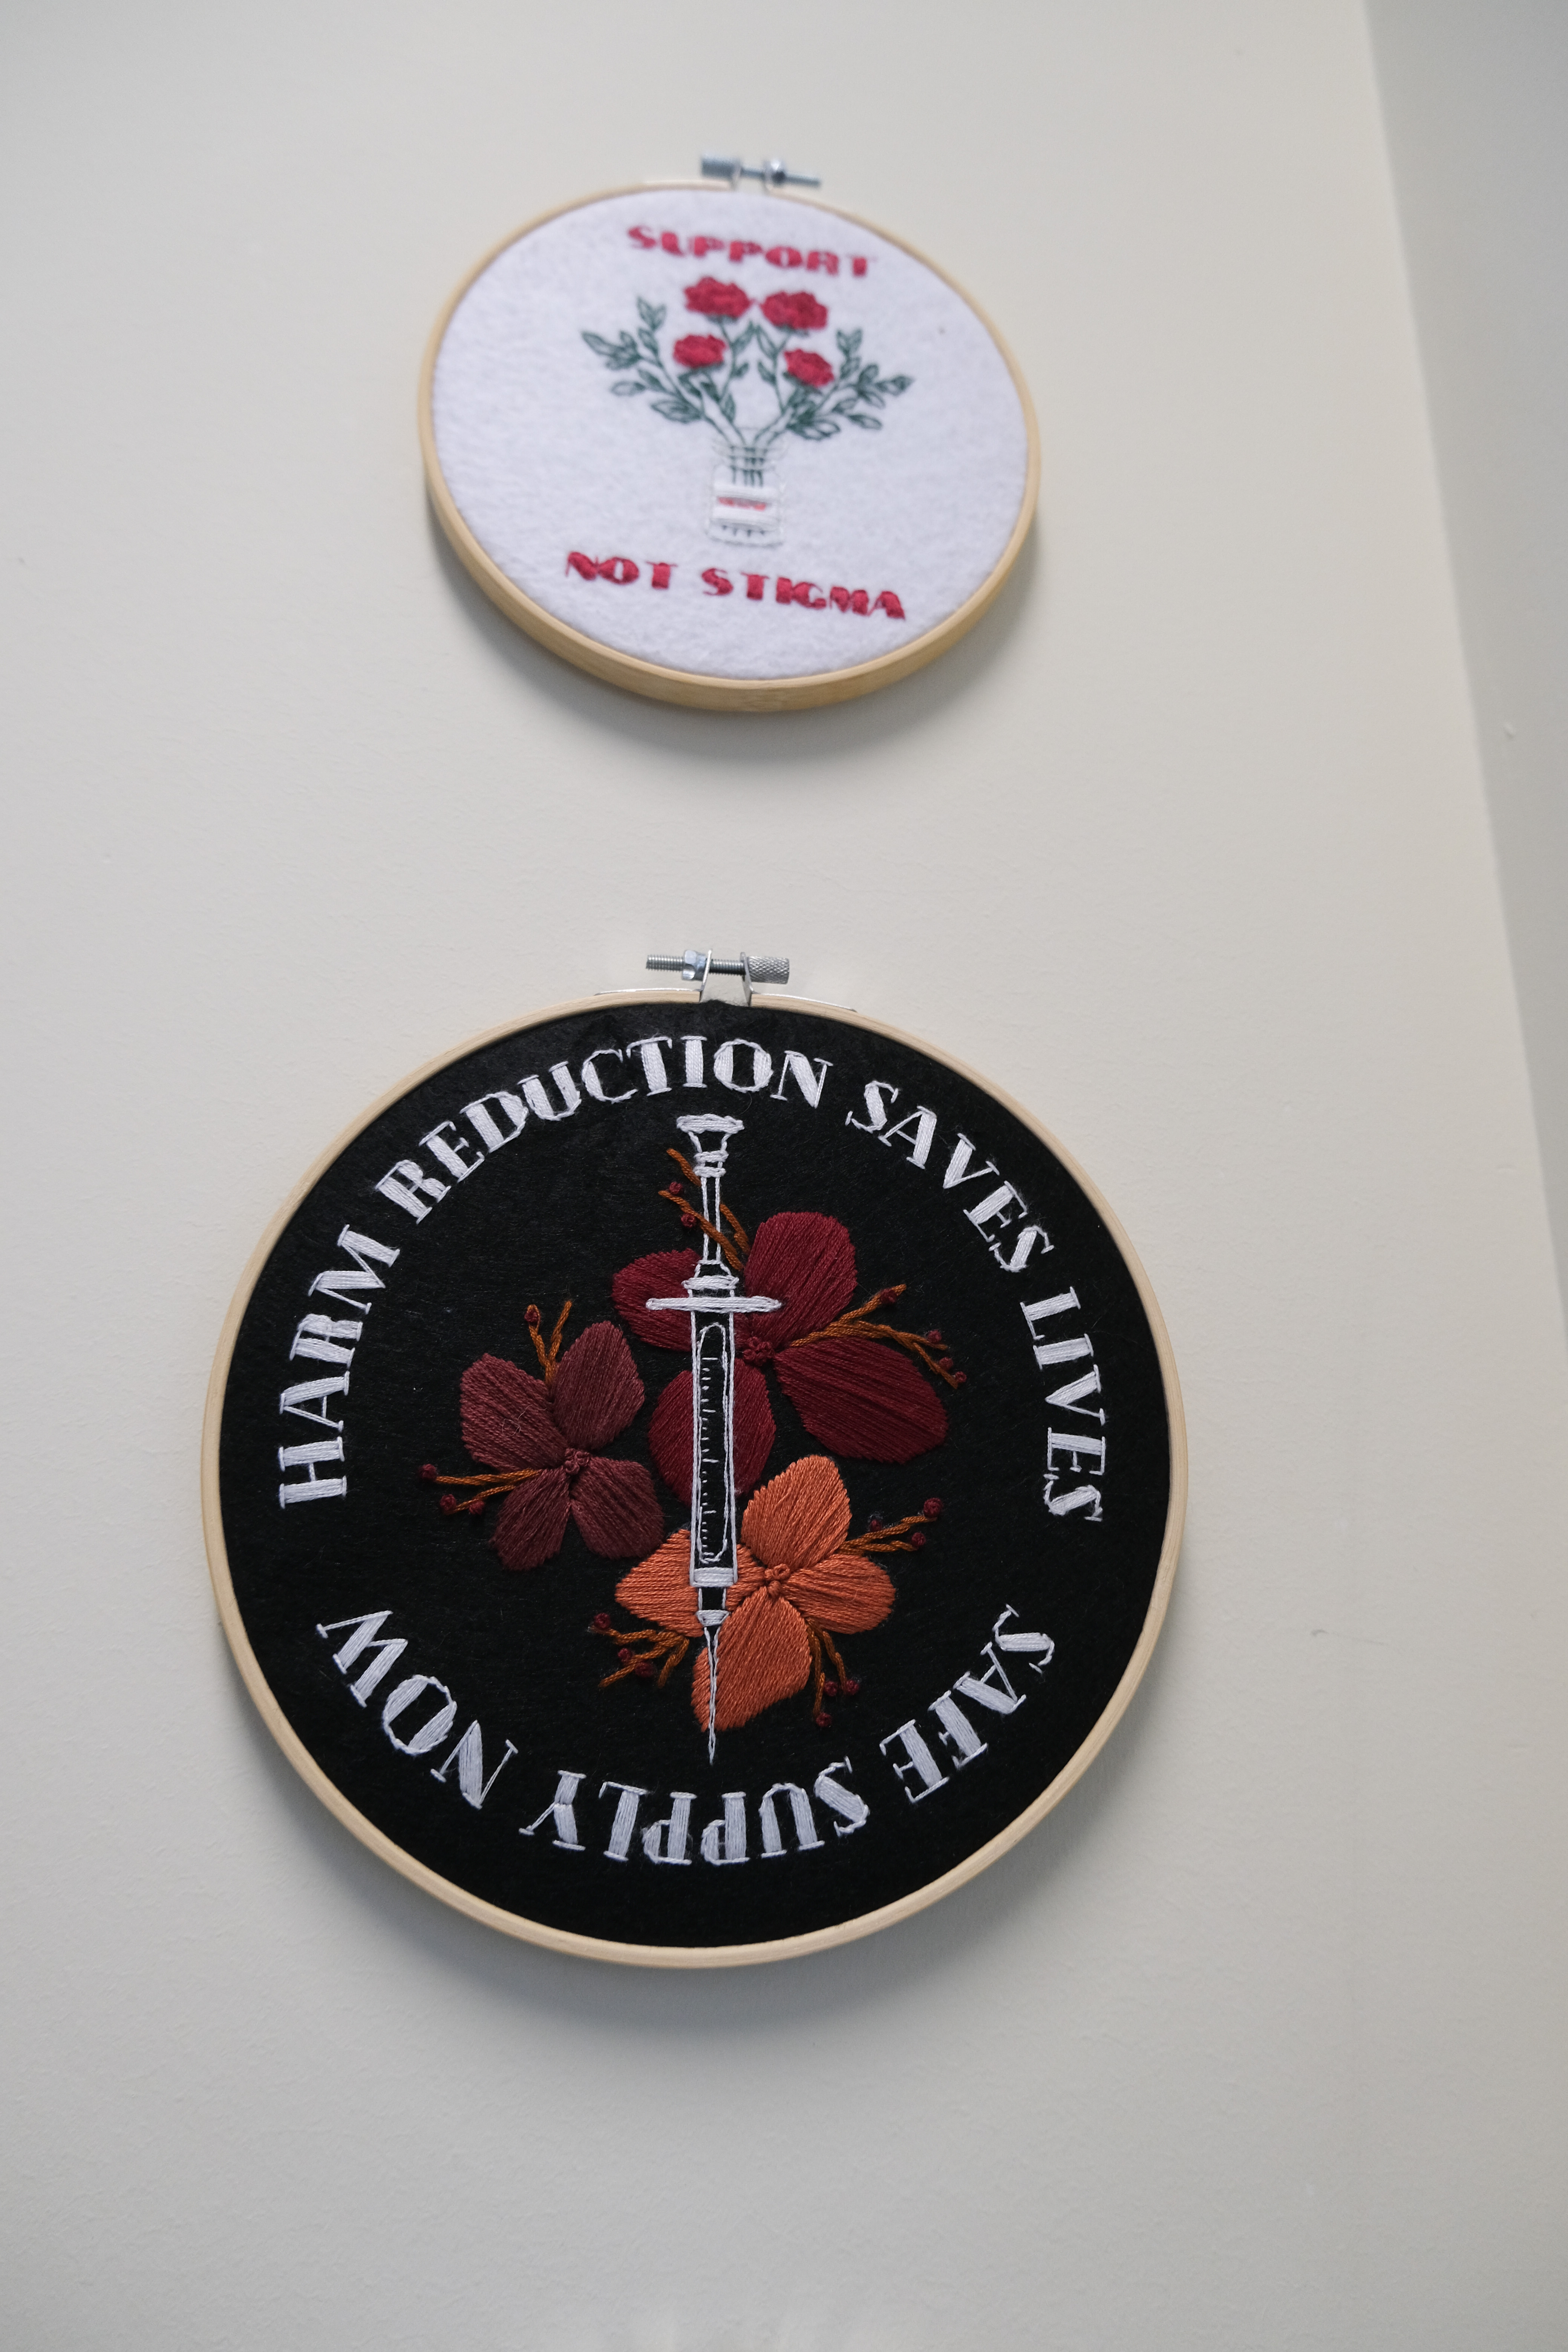 Artwork on the walls in Waraksa's office reinforces the importance of a harm reduction approach to care.